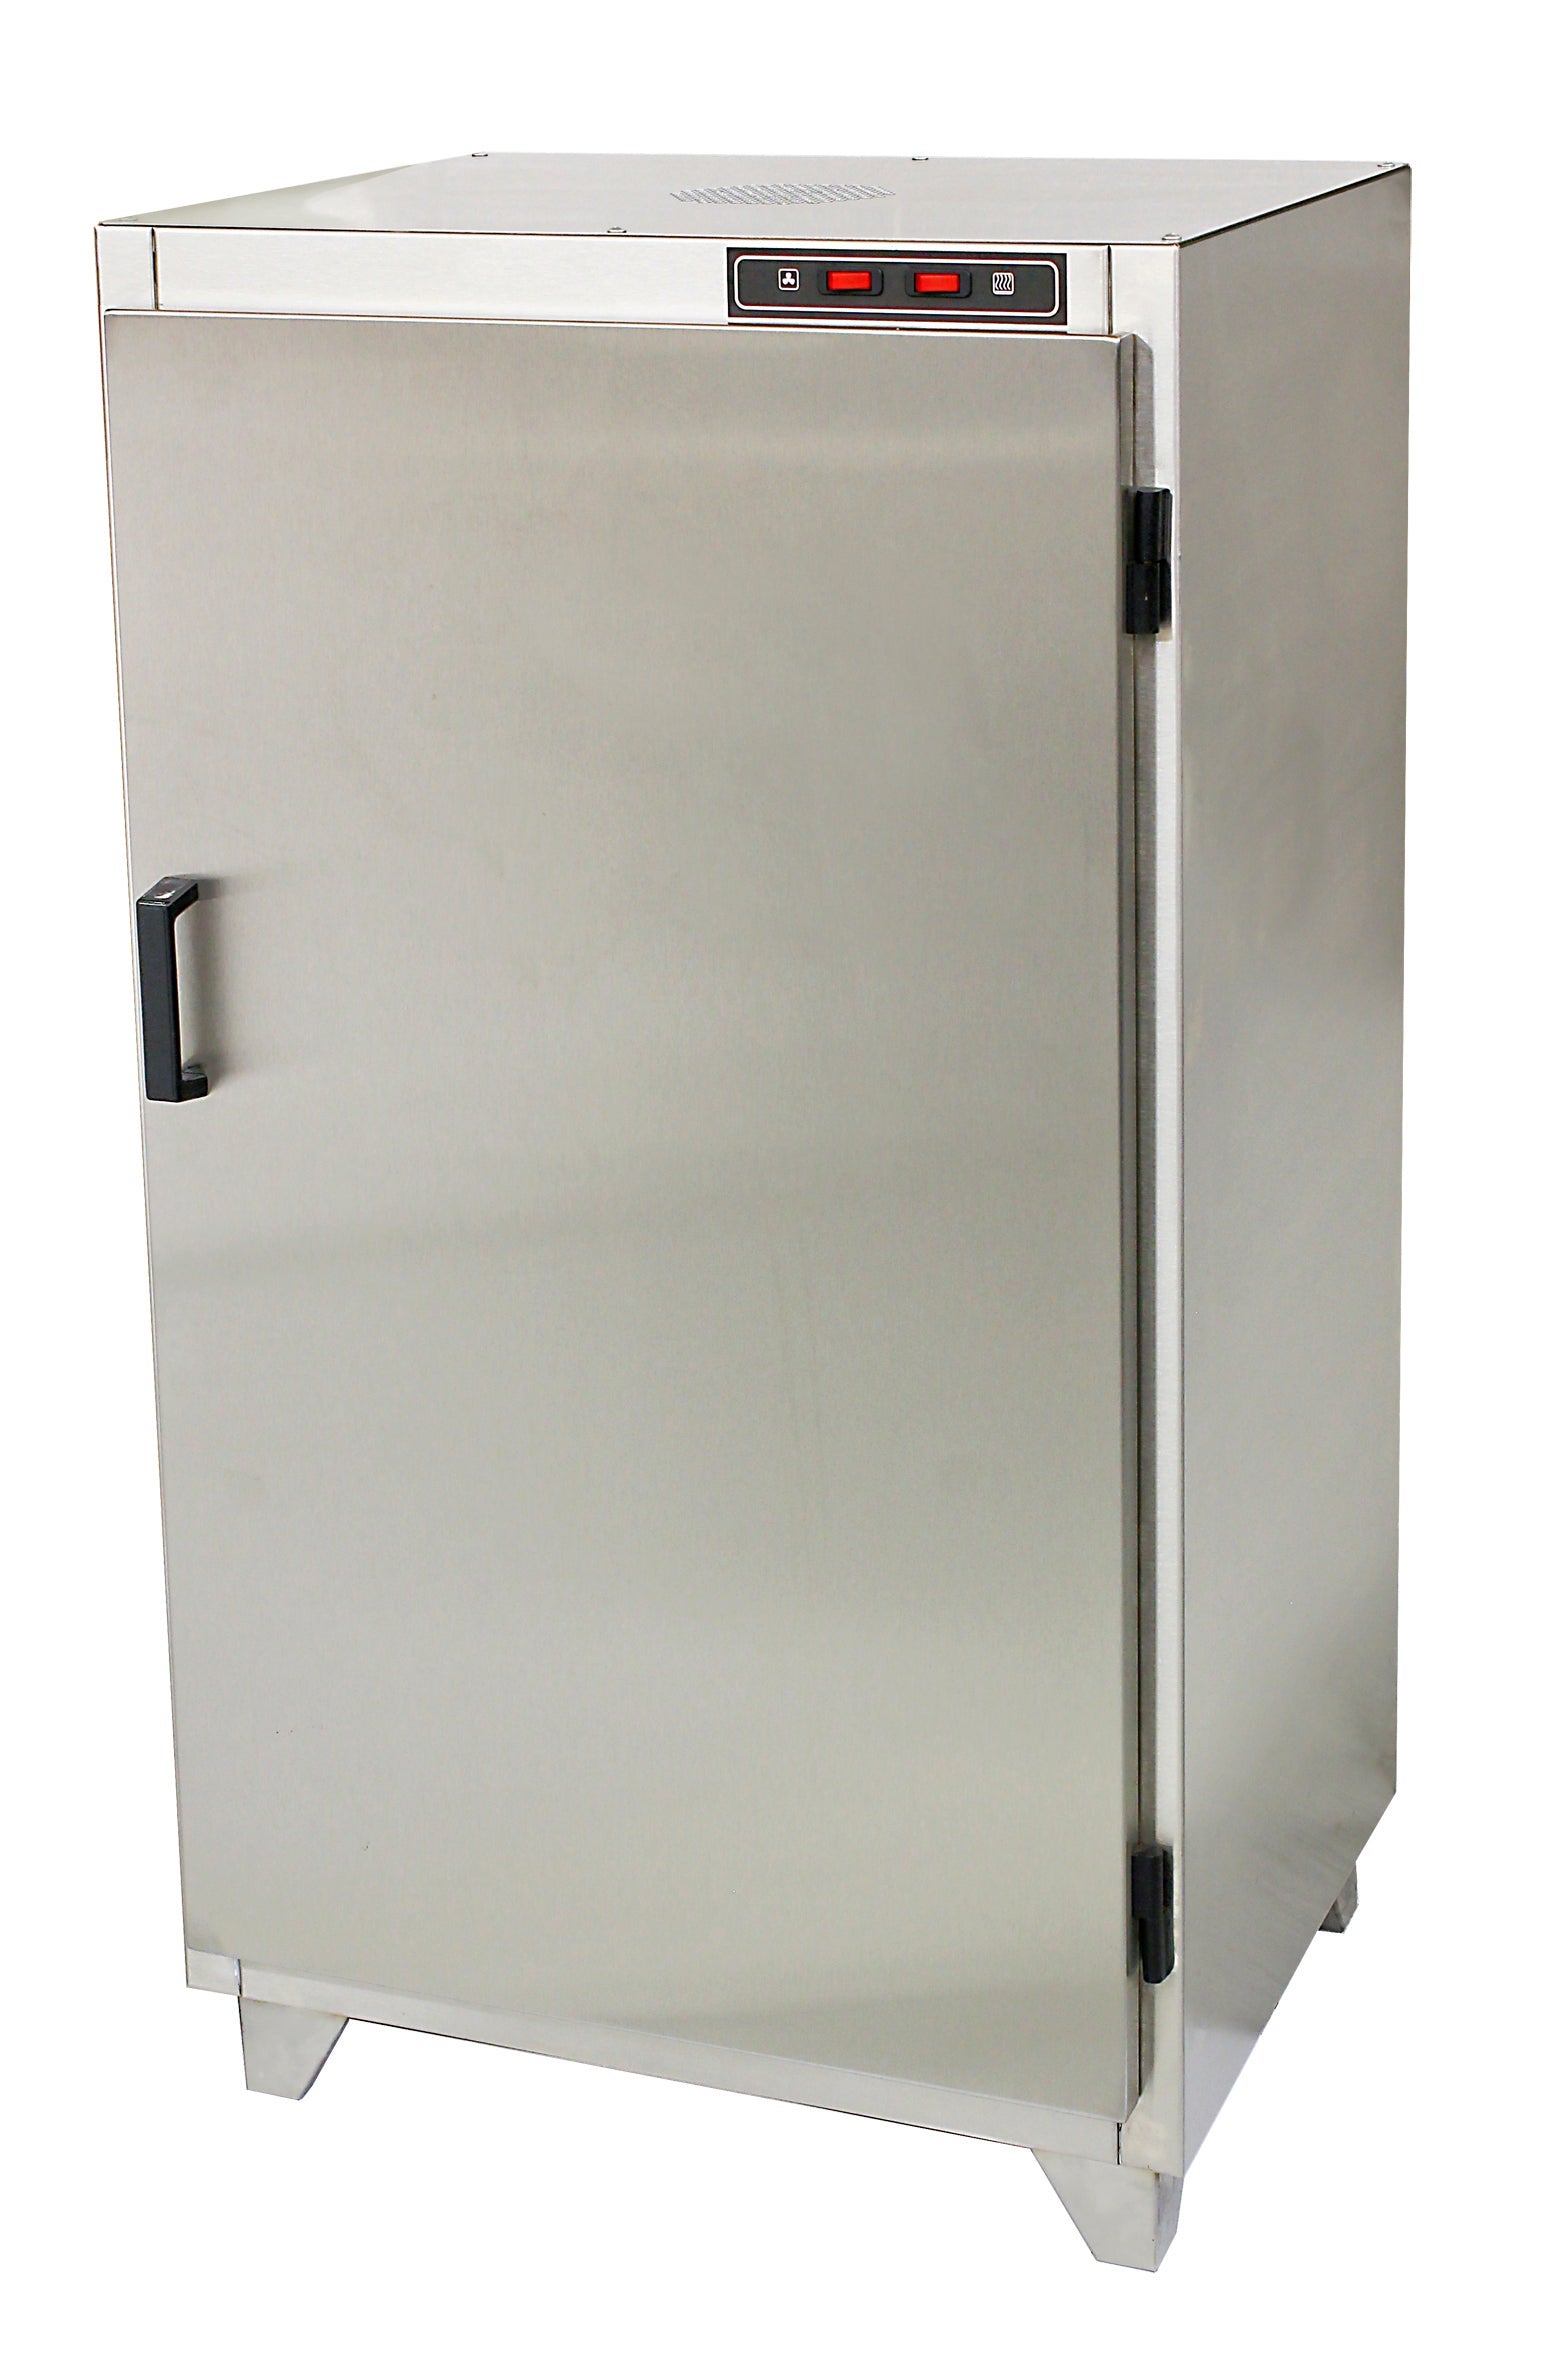 Butcherquip Biltong Cabinet Small ICE-BCA0001 Dry Aging Cabinets